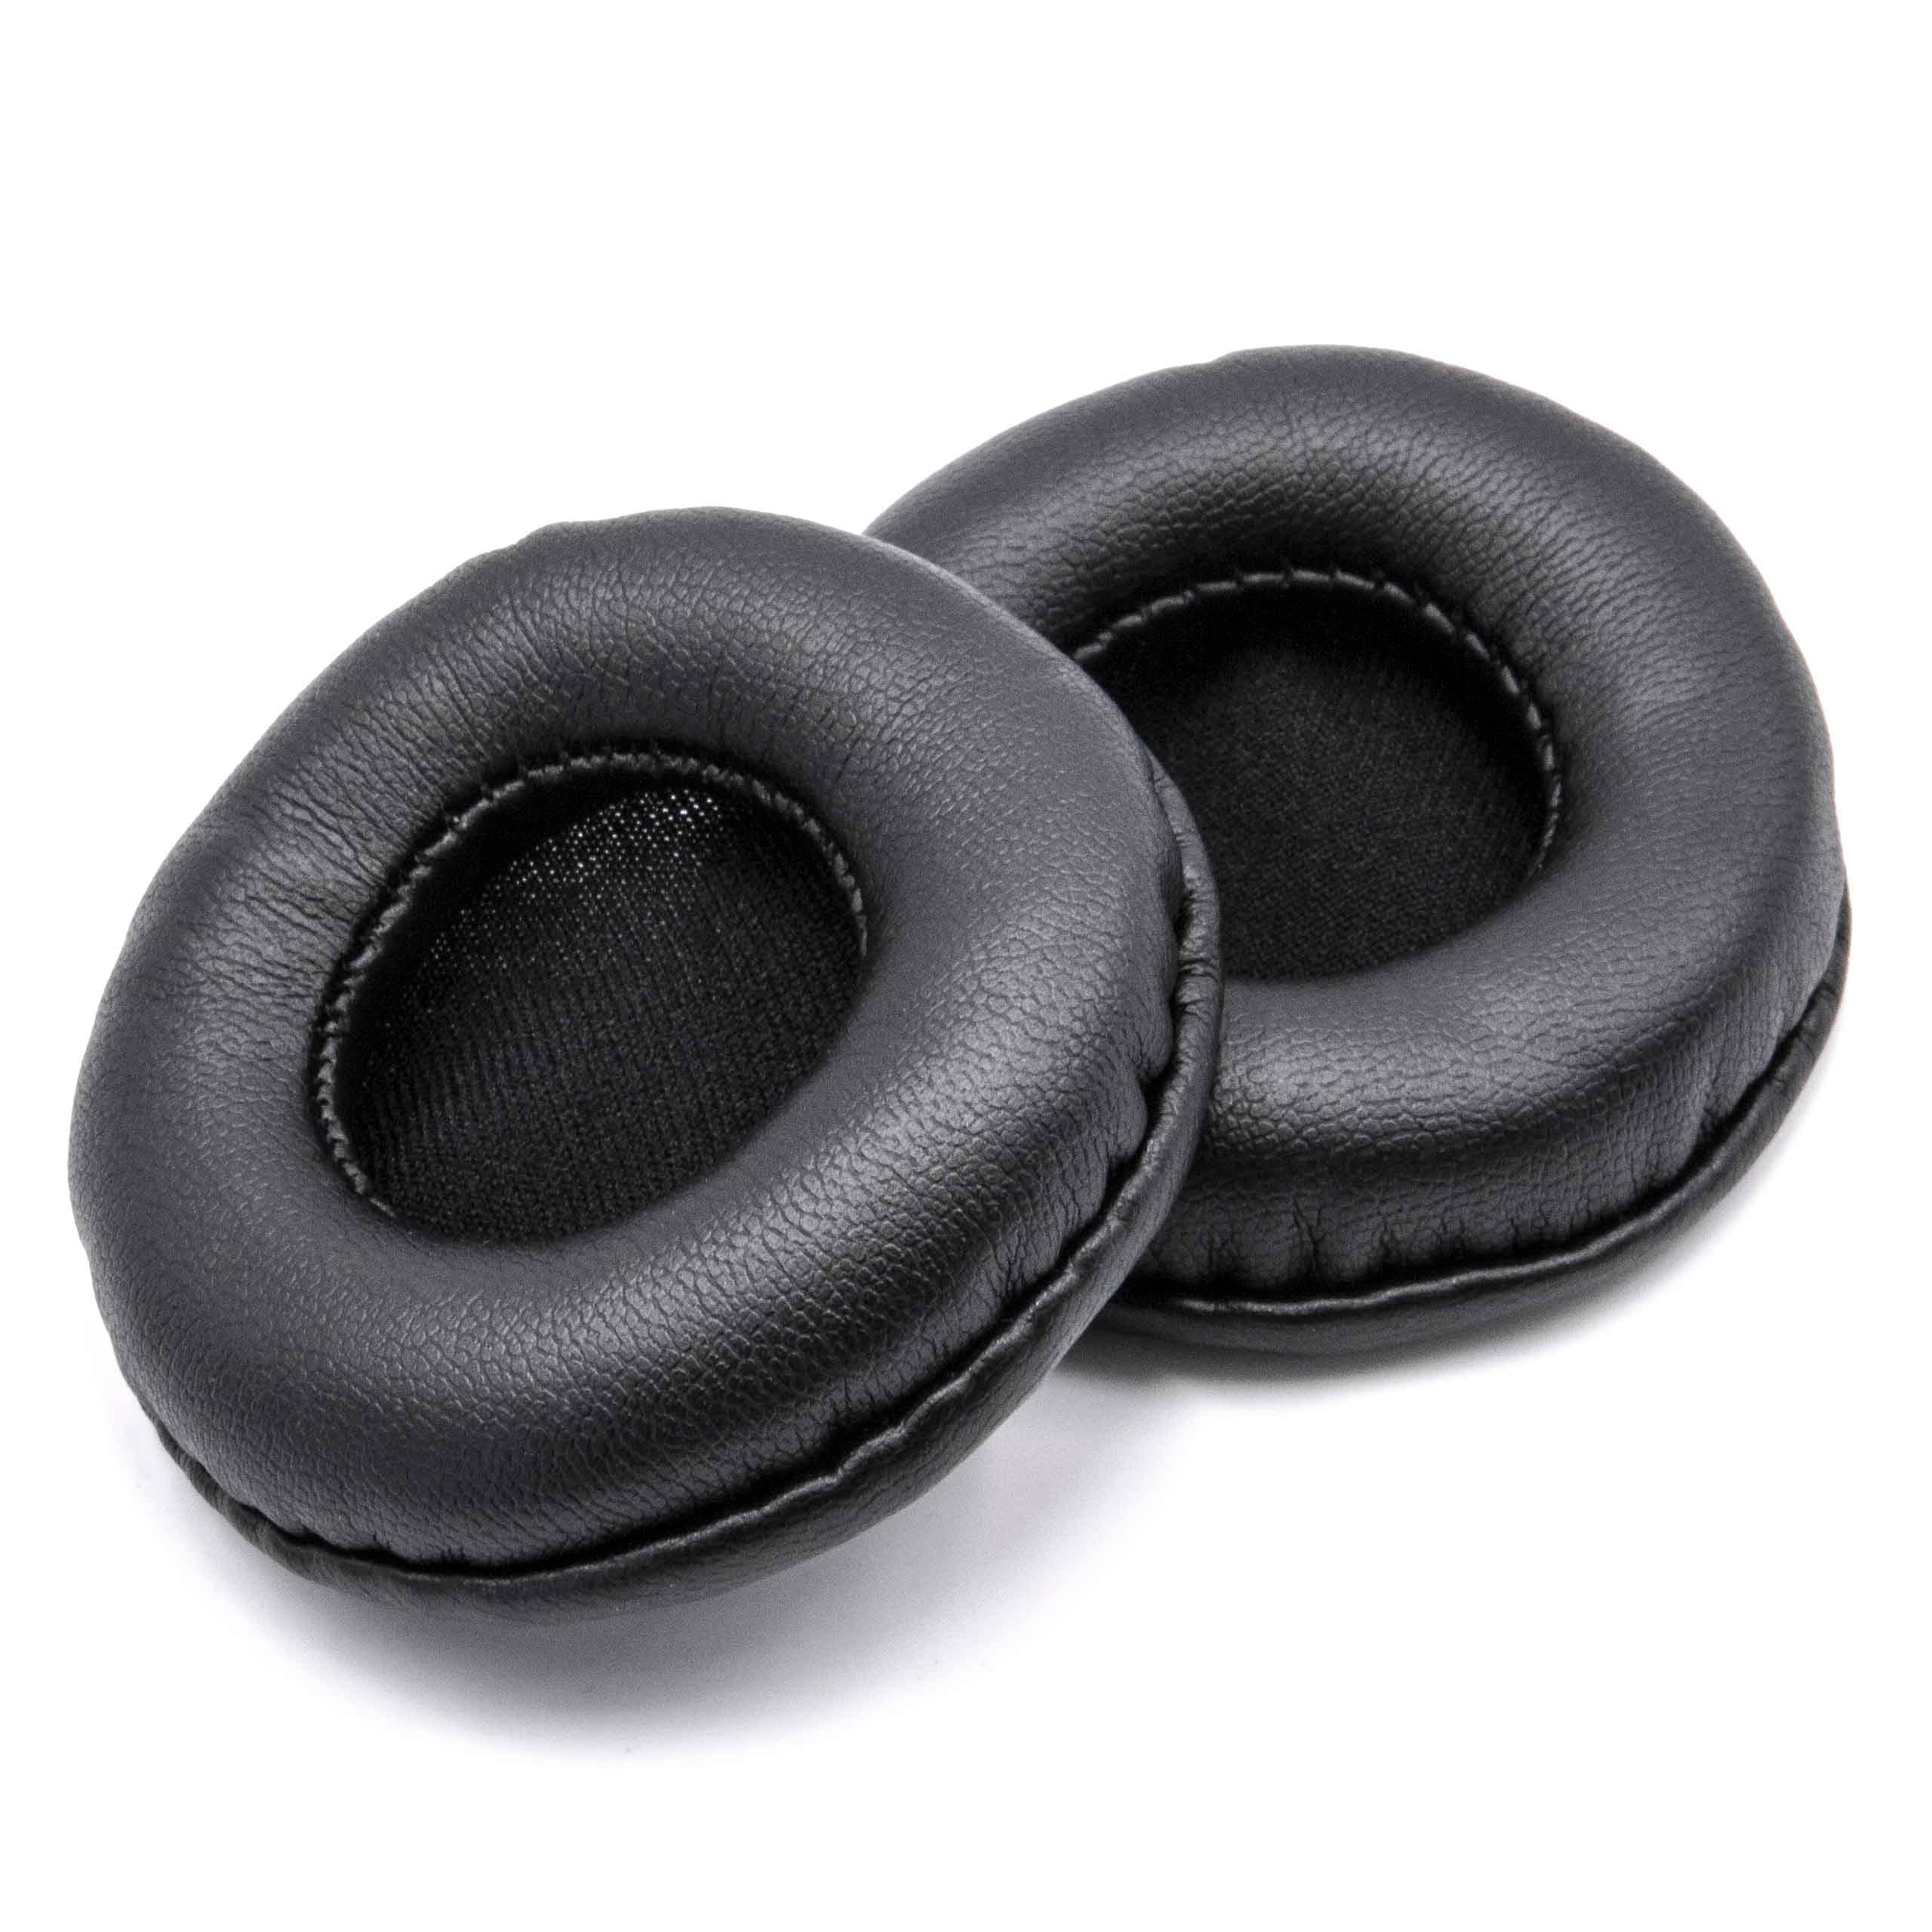 2x Ear Pads suitable for ATH / headphones which require 60mm ear pads / Sony ES55 Headphones etc. - polyuretha